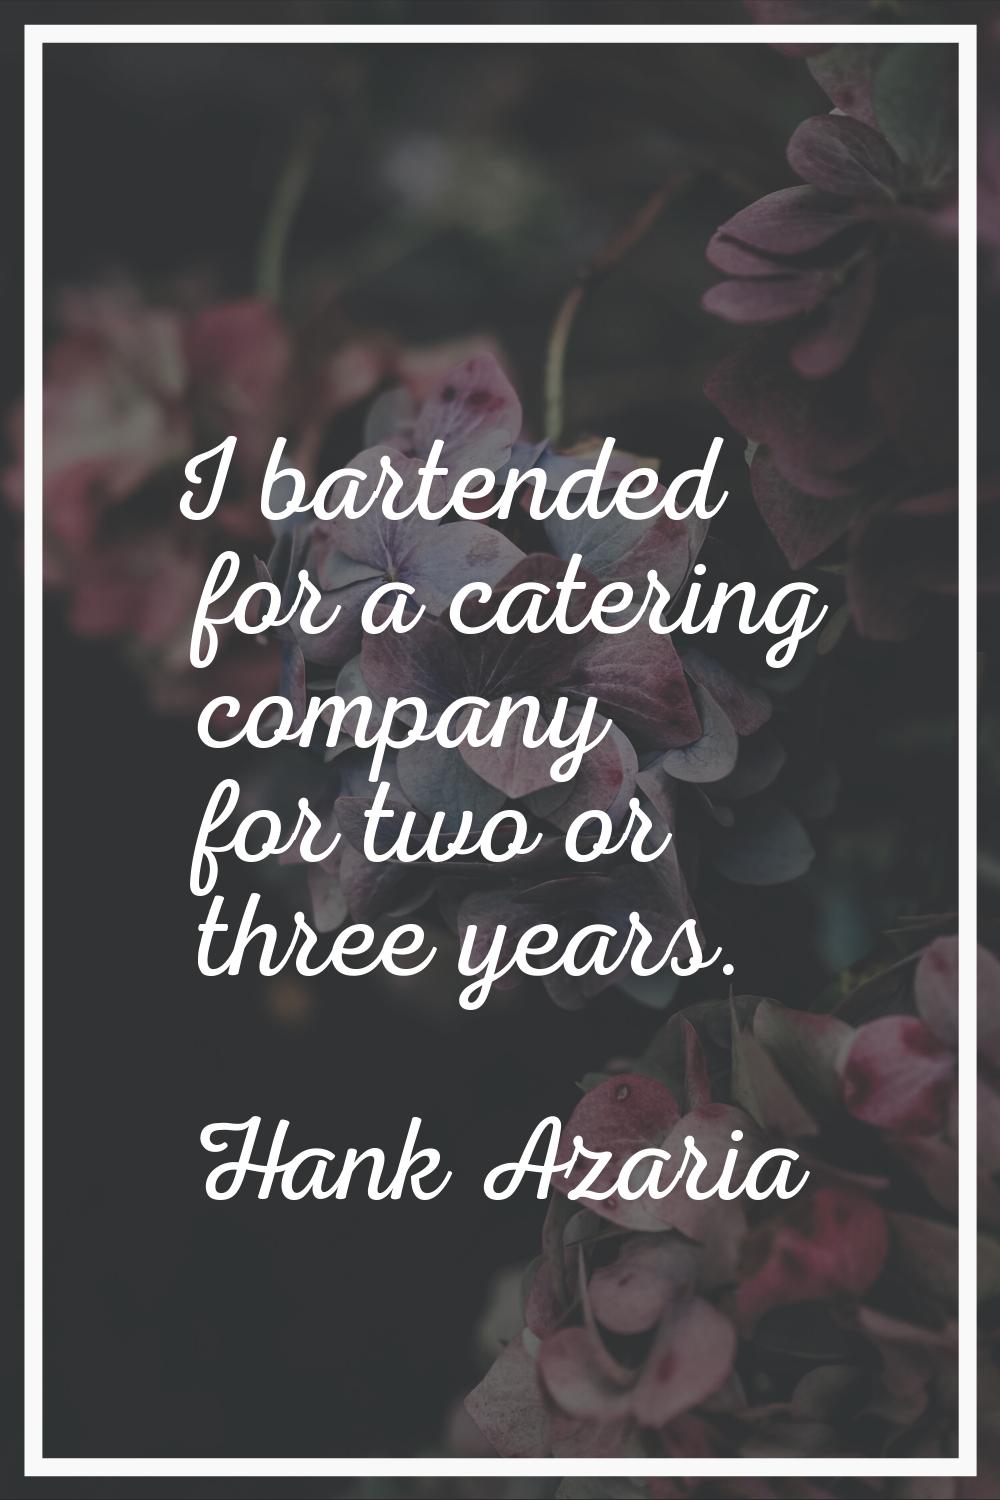 I bartended for a catering company for two or three years.